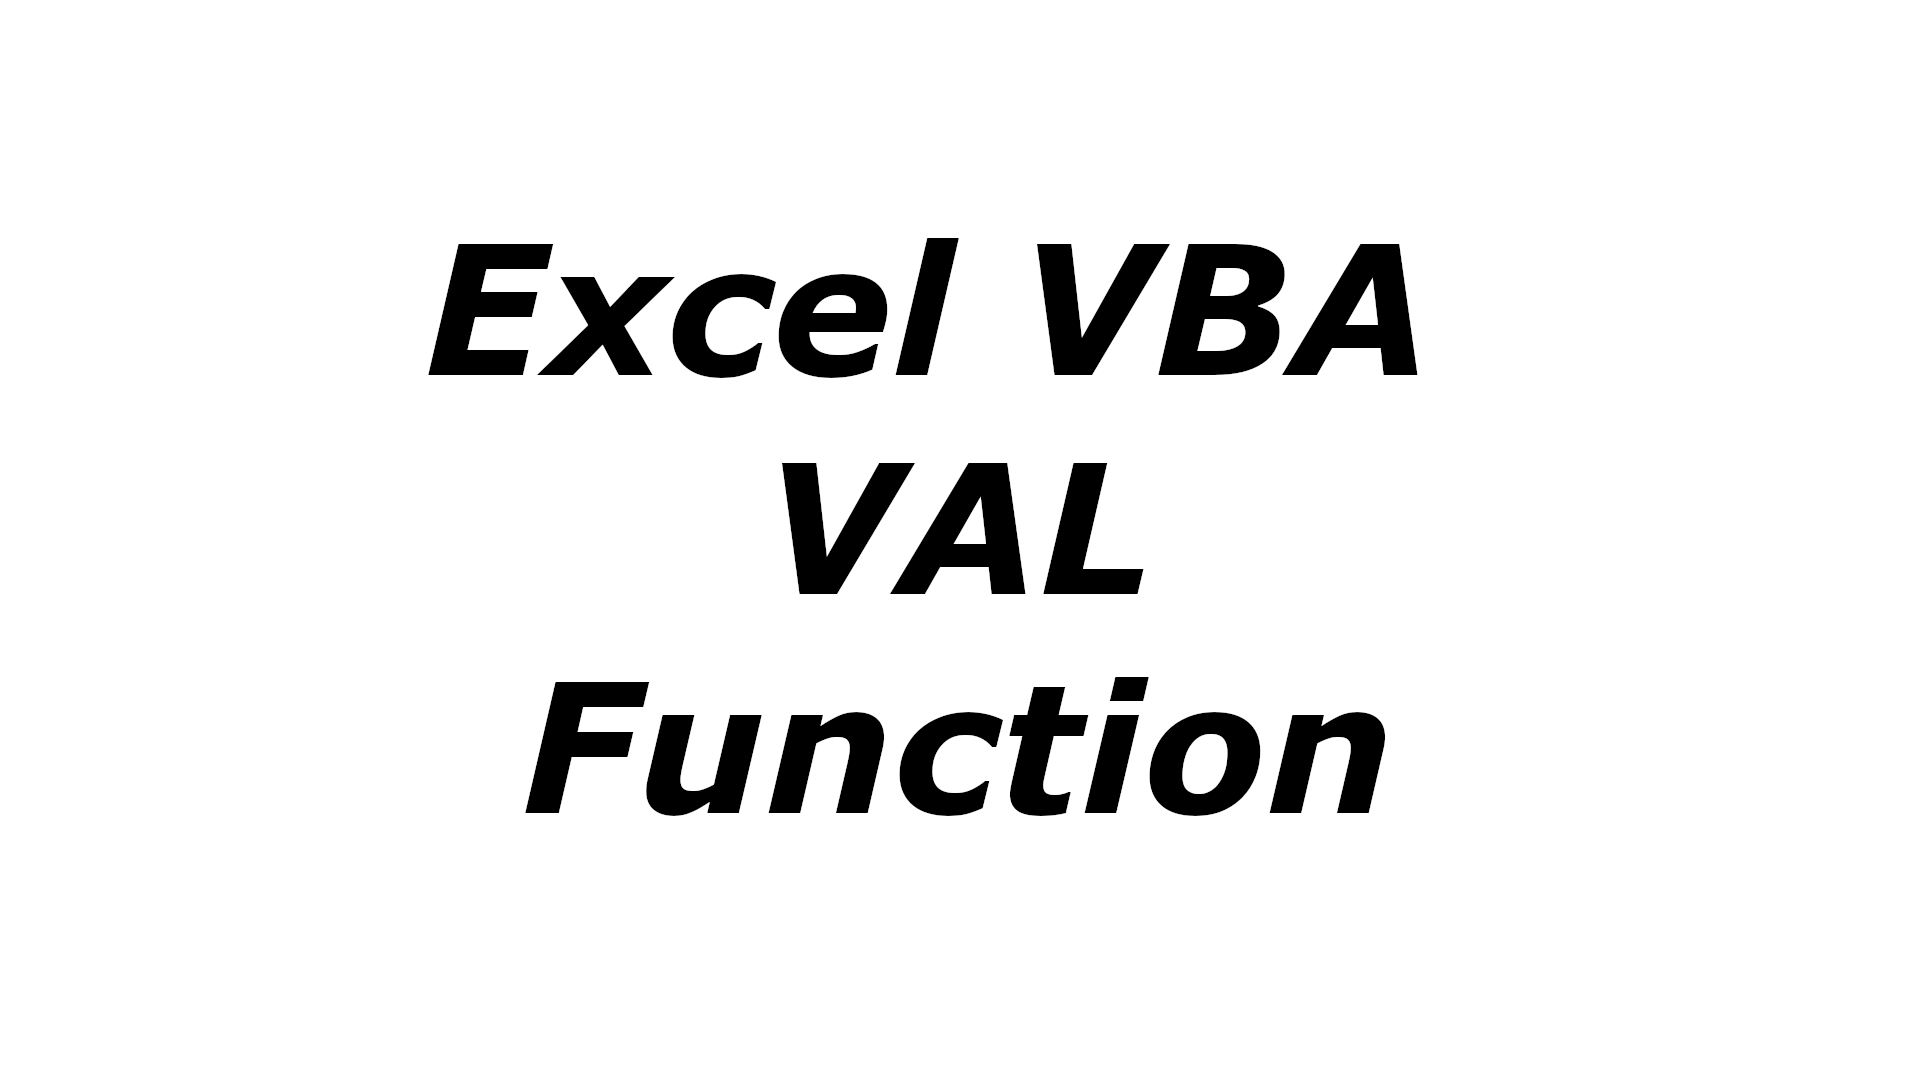 Excel VBA VAL function